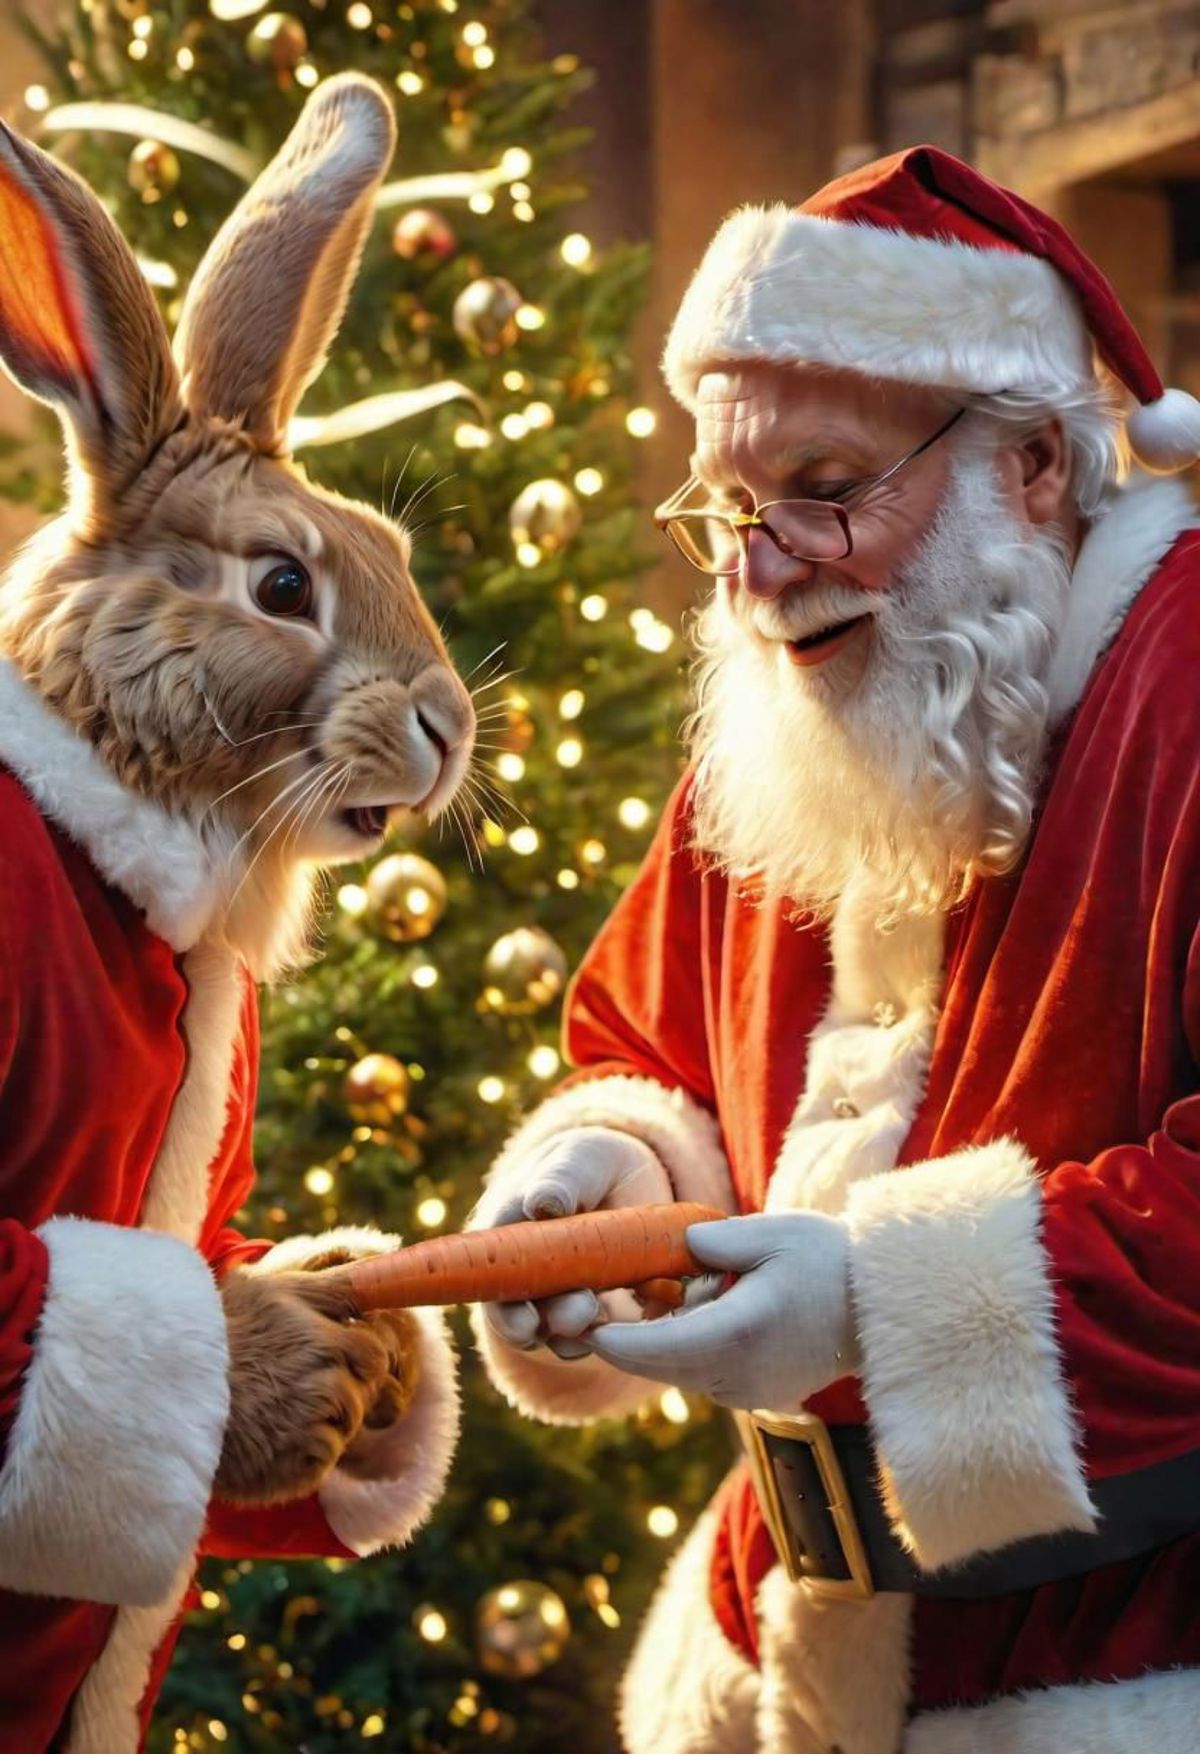 Santa Claus and a bunny rabbit with a carrot, posing for a photo.